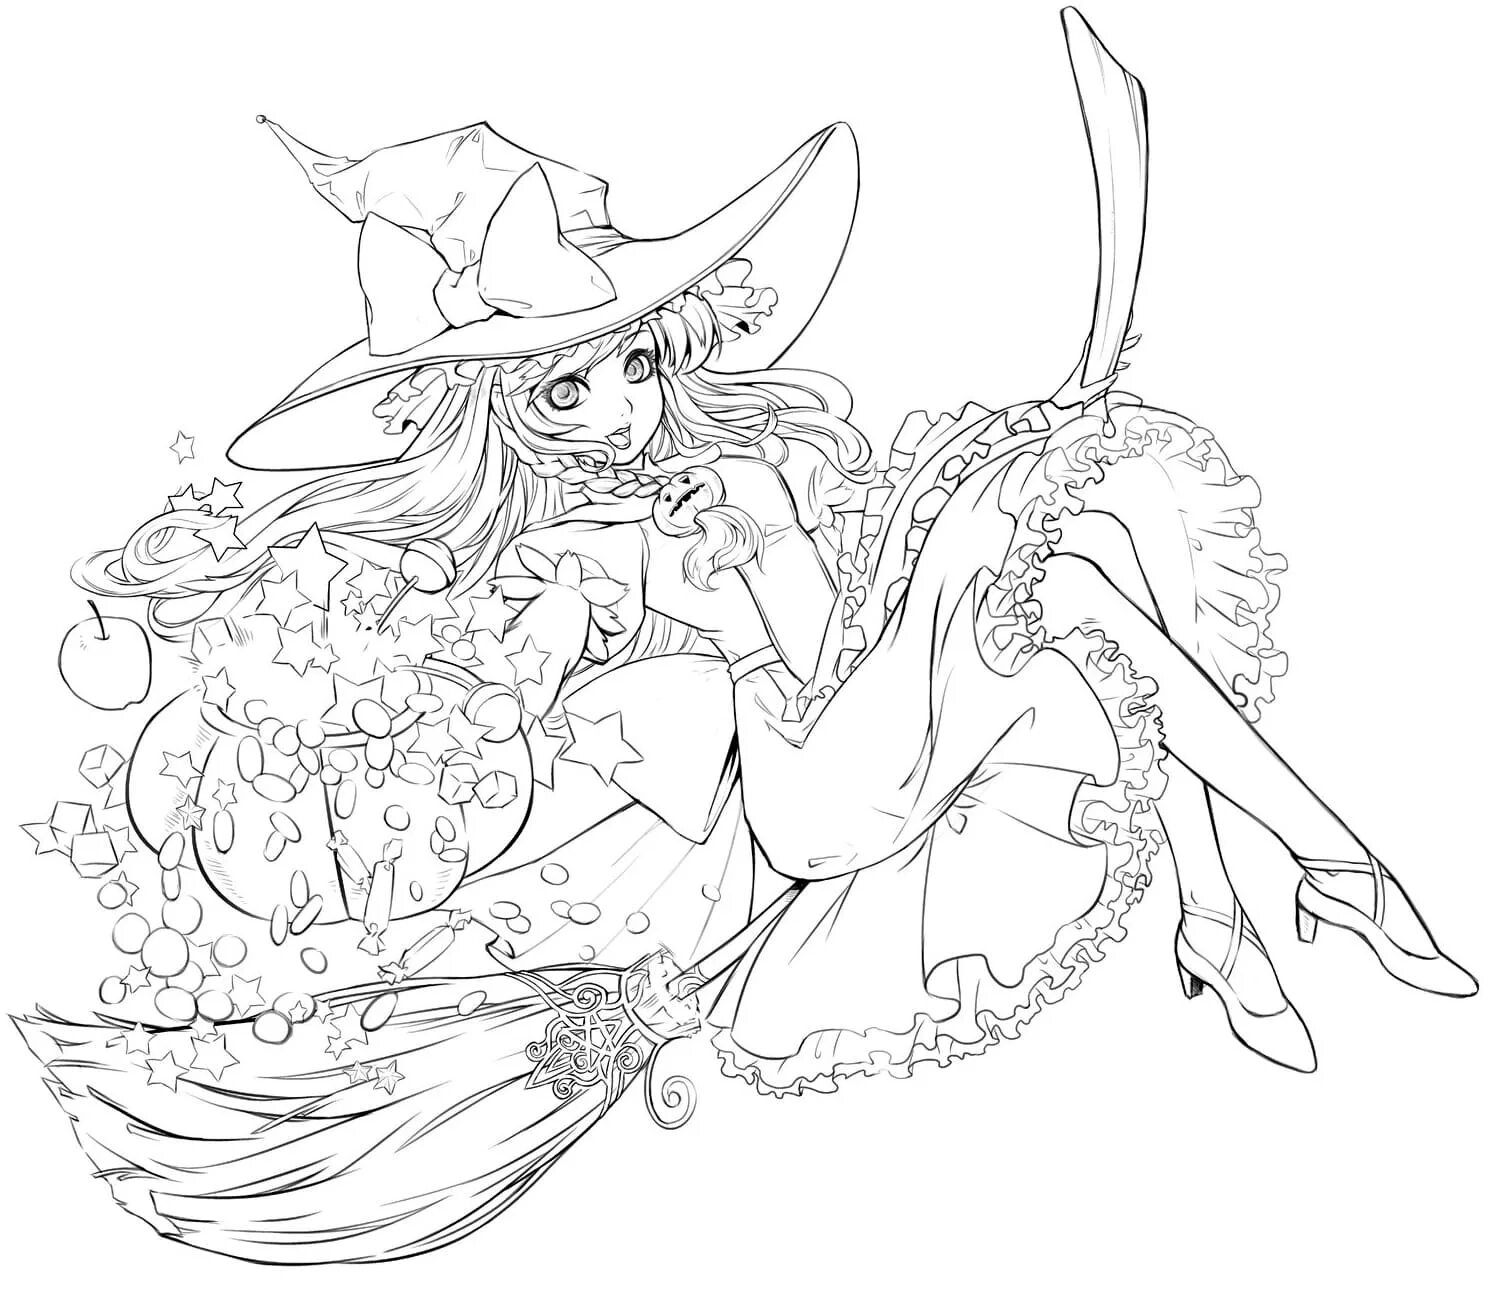 Coloring book peace-loving aya and witch